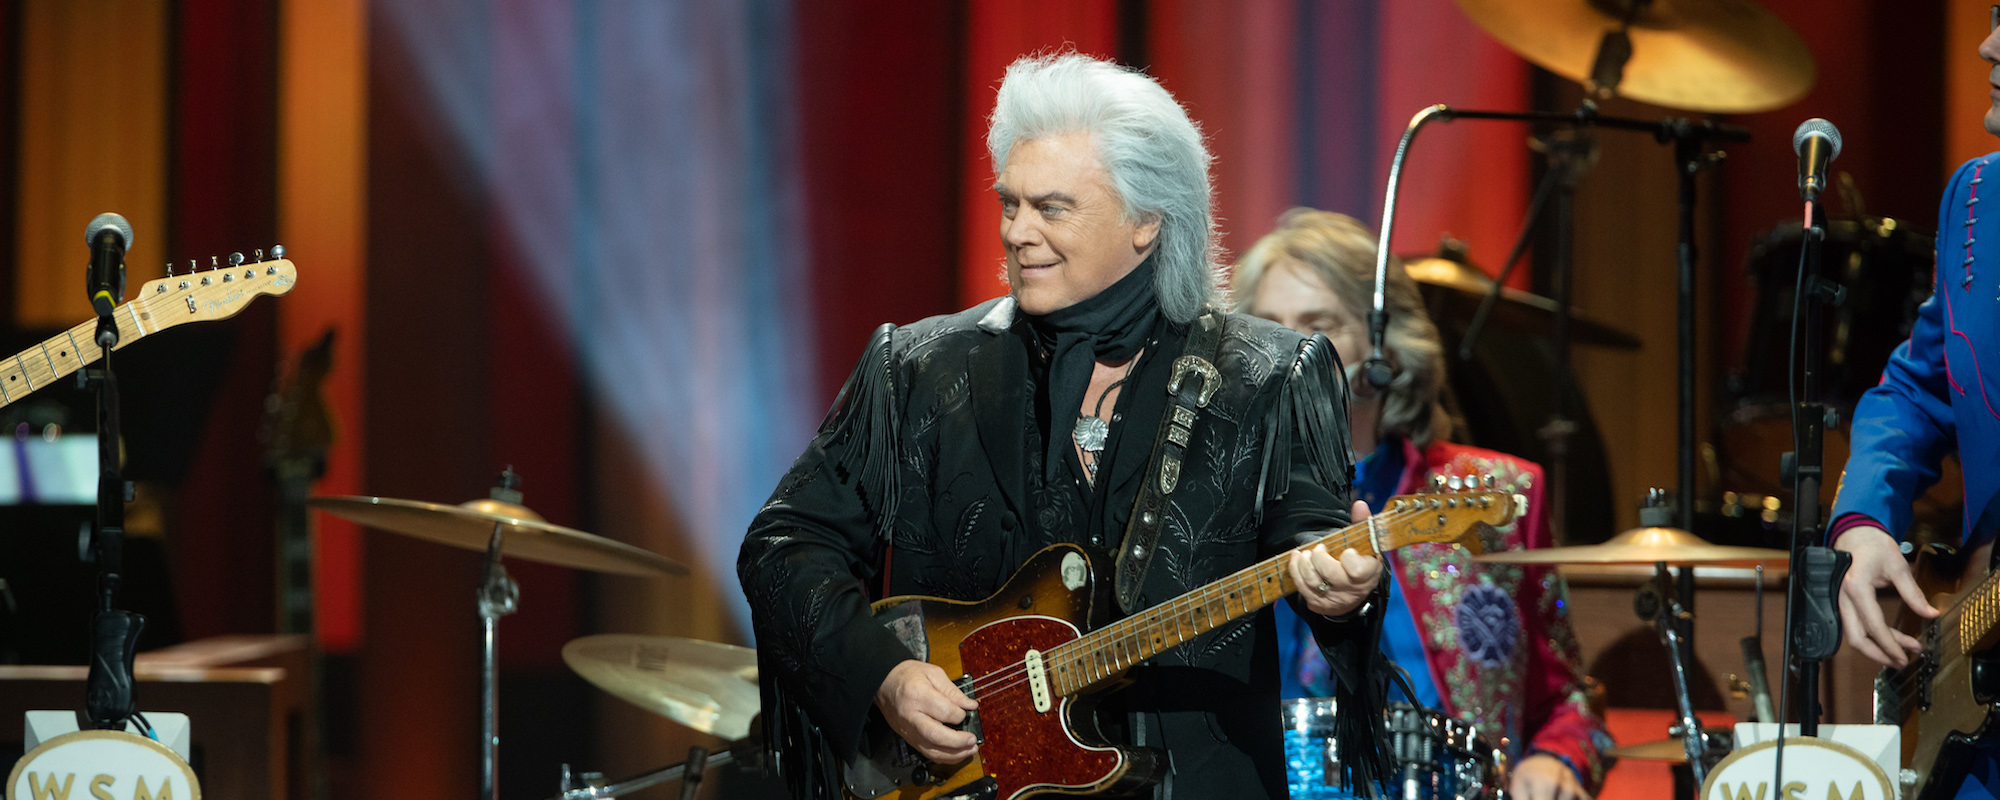 Marty Stuart Celebrates 30 Years with the Grand Ole Opry, Shares New Song and Details Return to TV